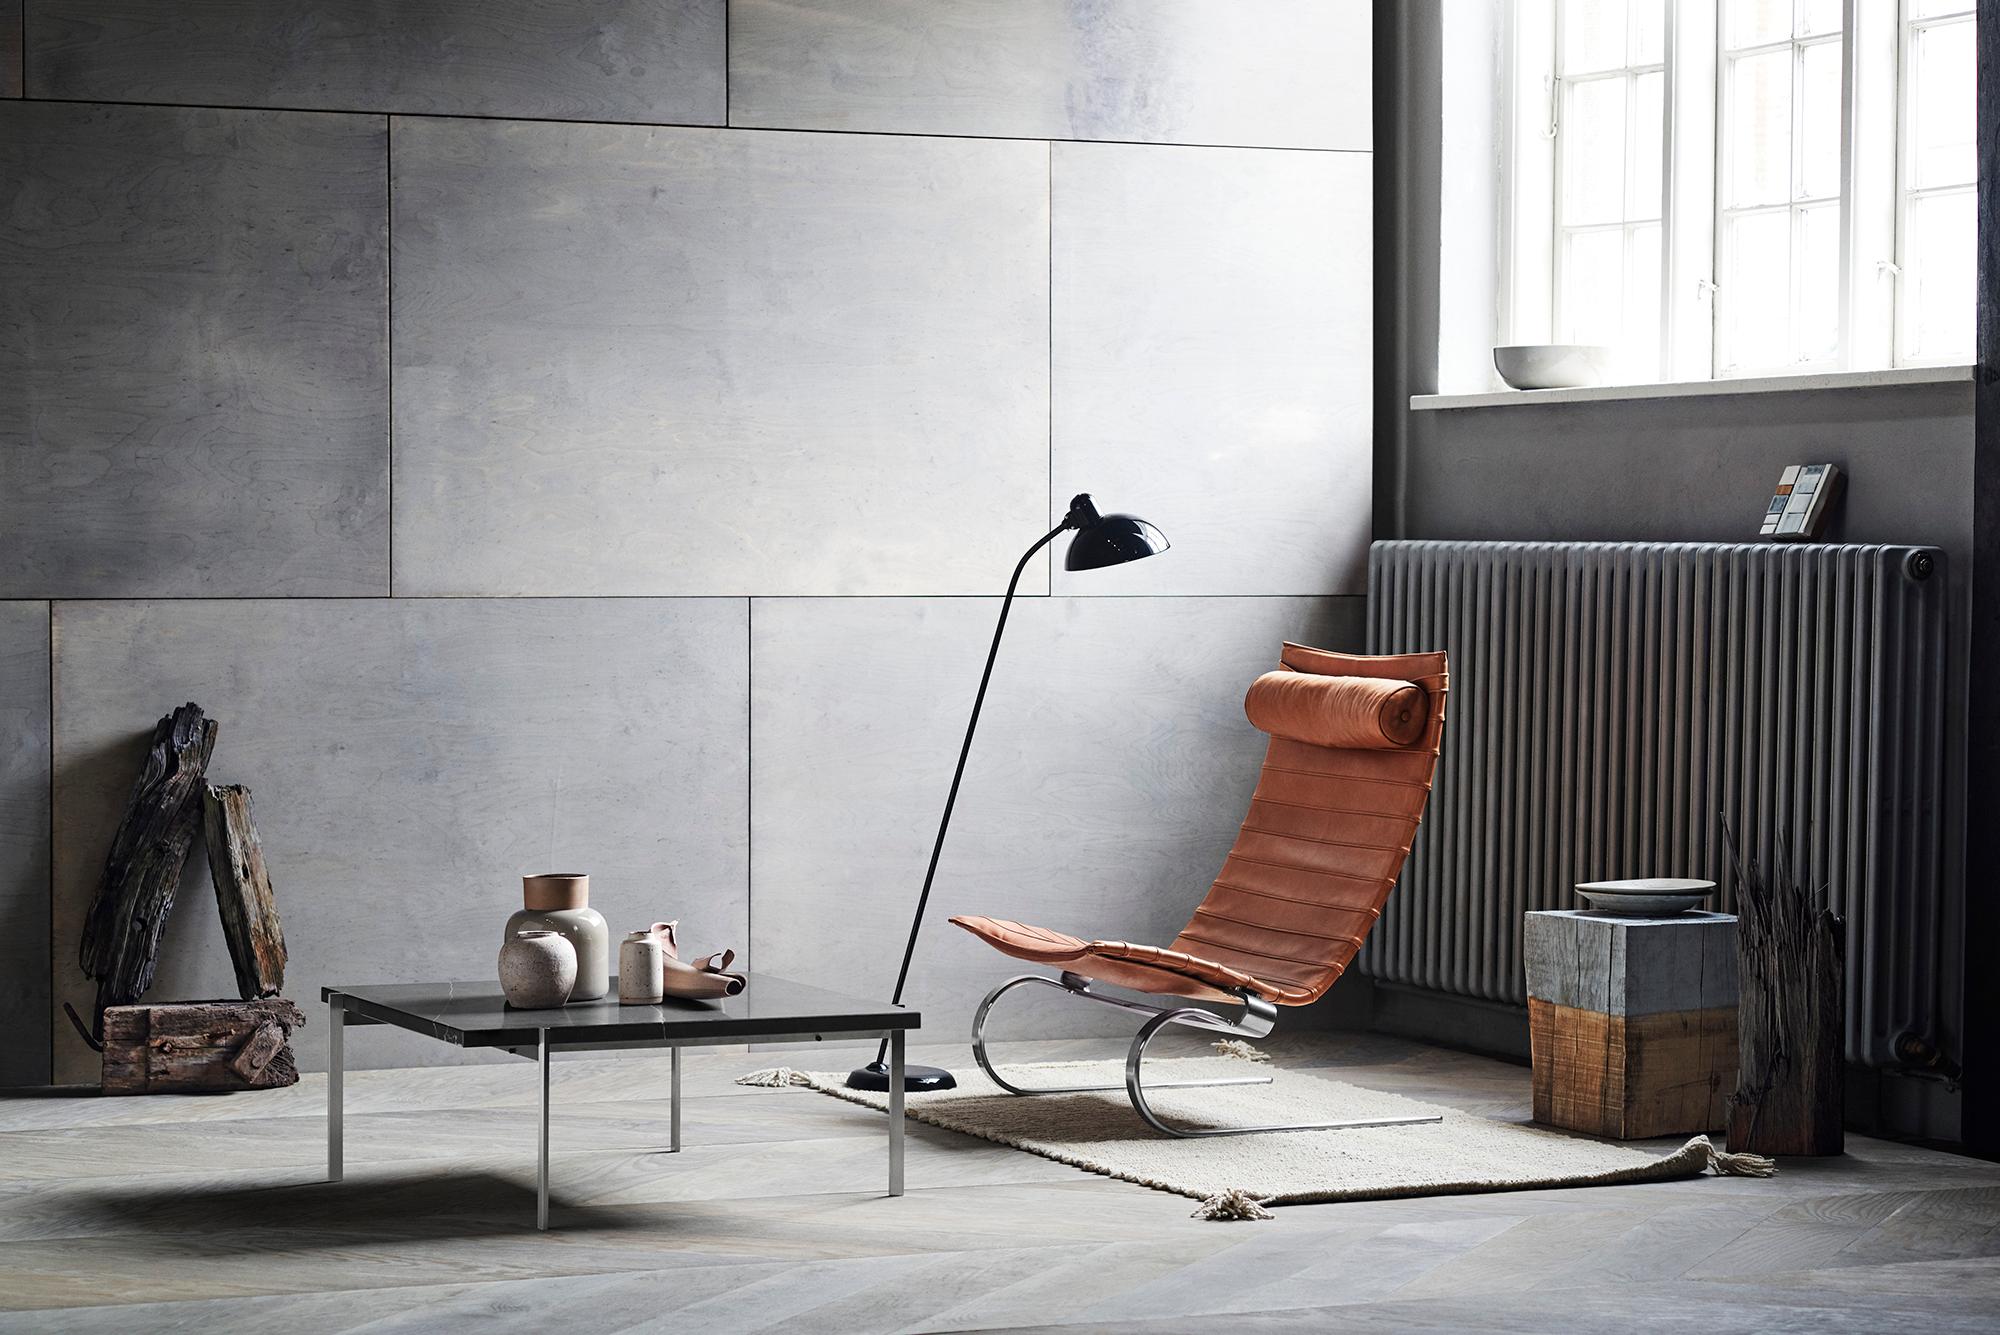 Christian Dell 'Kaiser Idell 6556-F' Floor Lamp for Fritz Hansen in Gloss Black.

 Established in 1872, Fritz Hansen has become synonymous with legendary Danish design. Combining timeless craftsmanship with an emphasis on sustainability, the brand’s